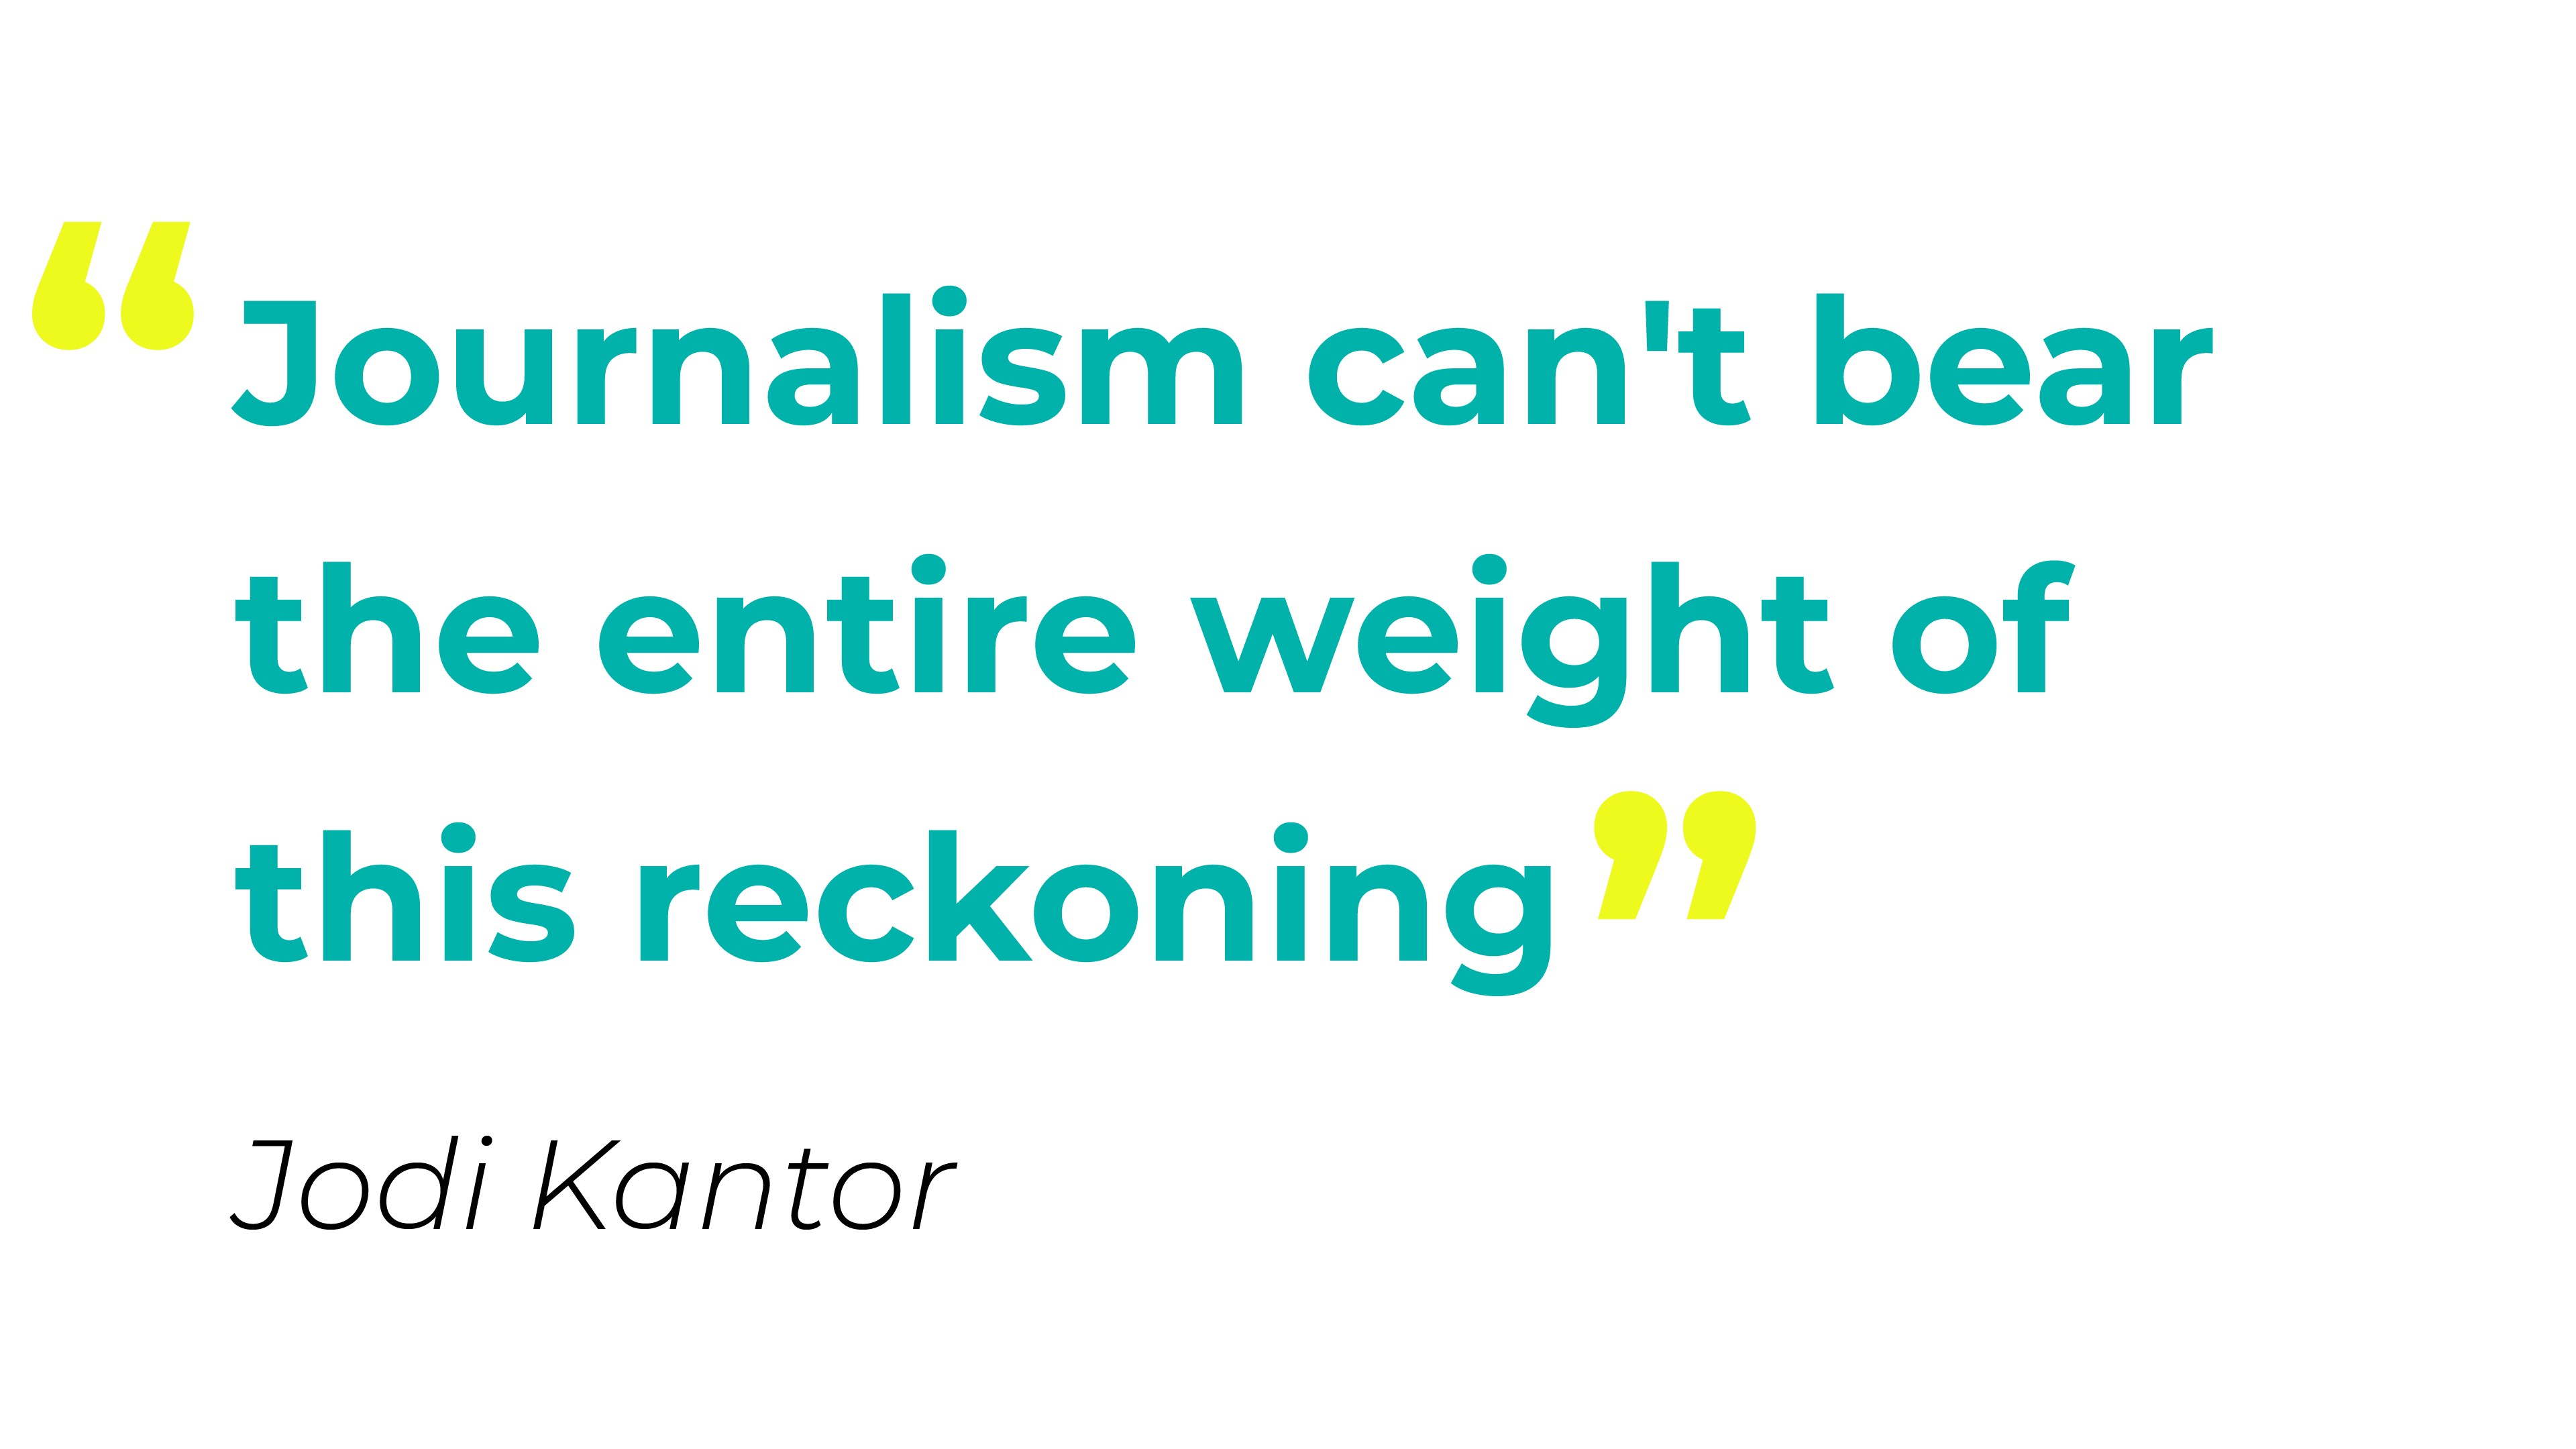 Journalism can't bear the entire weight of this reckoning" - Jodi Kantor